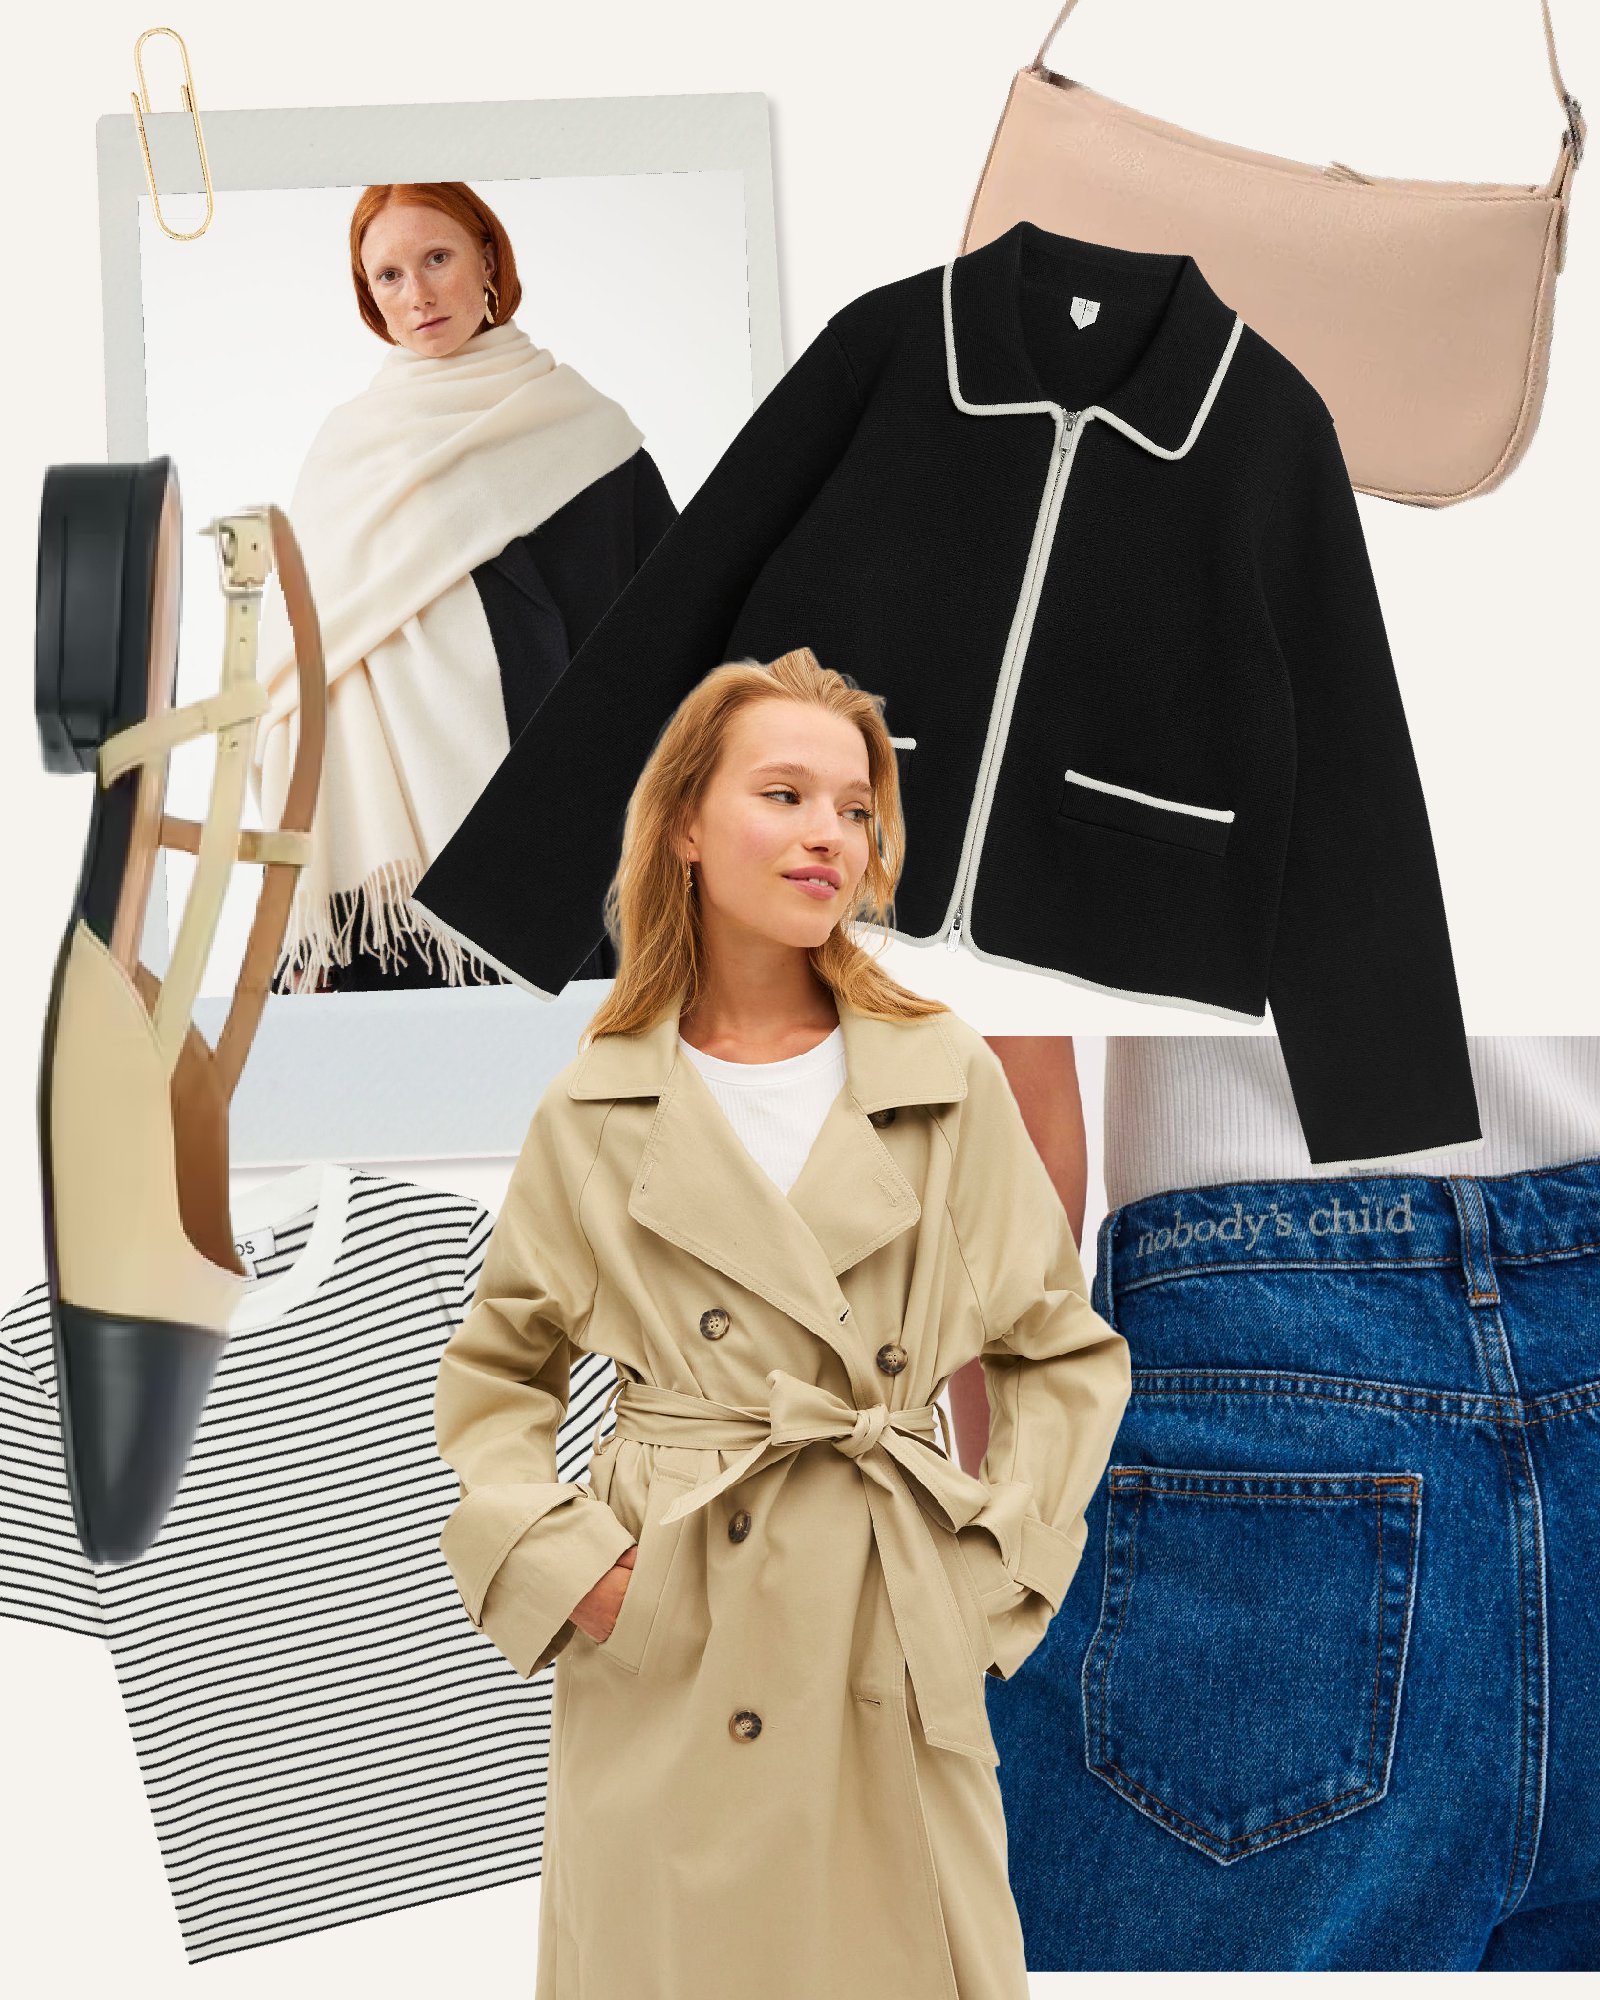 11 Updates To The French Girl Style Template Courtesy Of Chloé